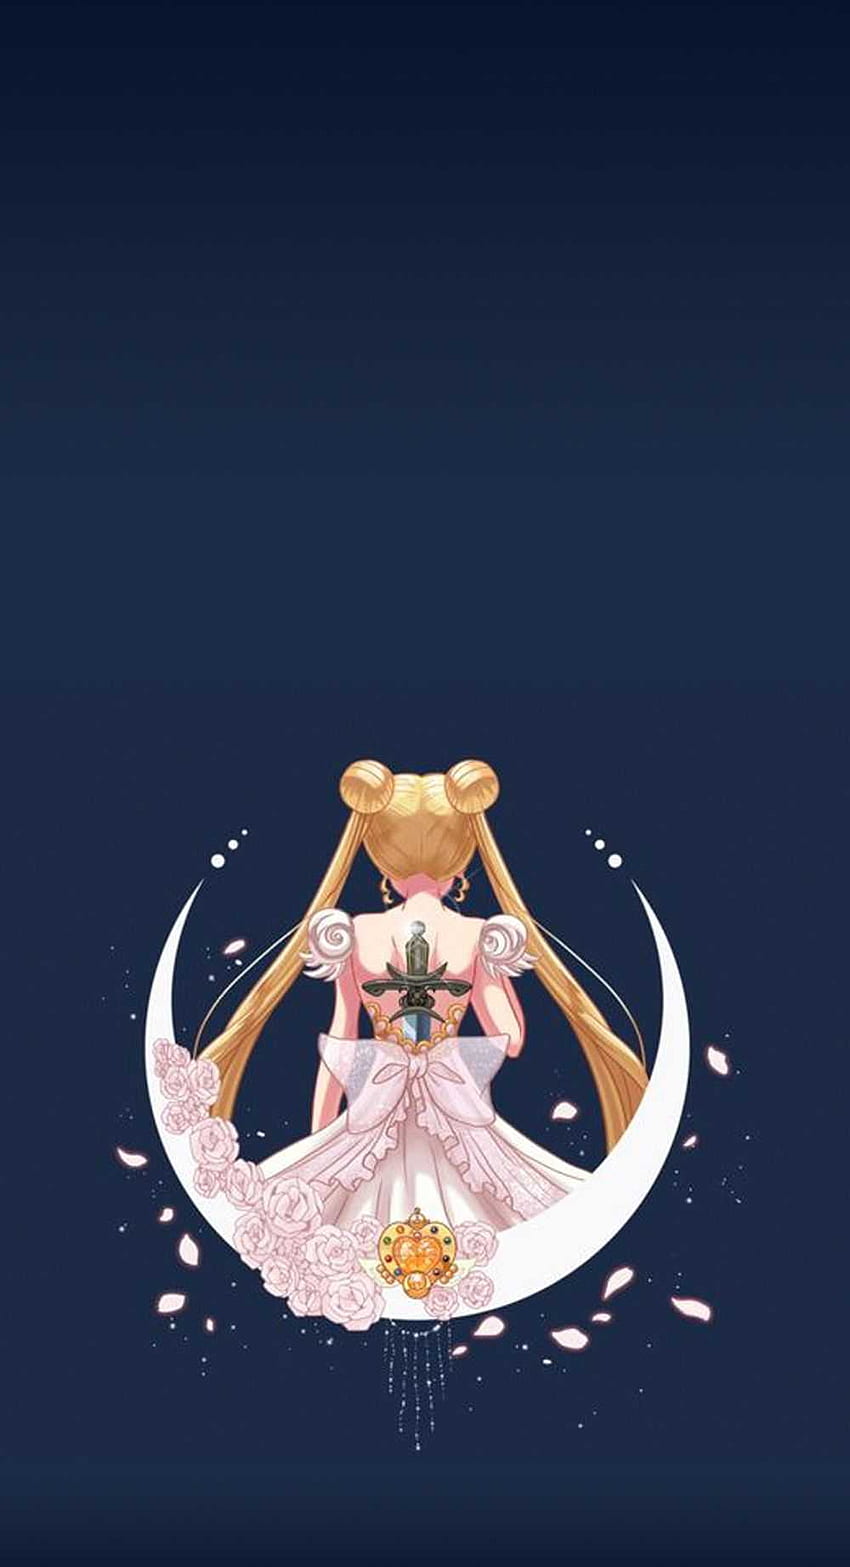 Aesthetic Sailor Moon - Most Popular Aesthetic Sailor Moon Background, Sailor Moon 90s HD phone wallpaper